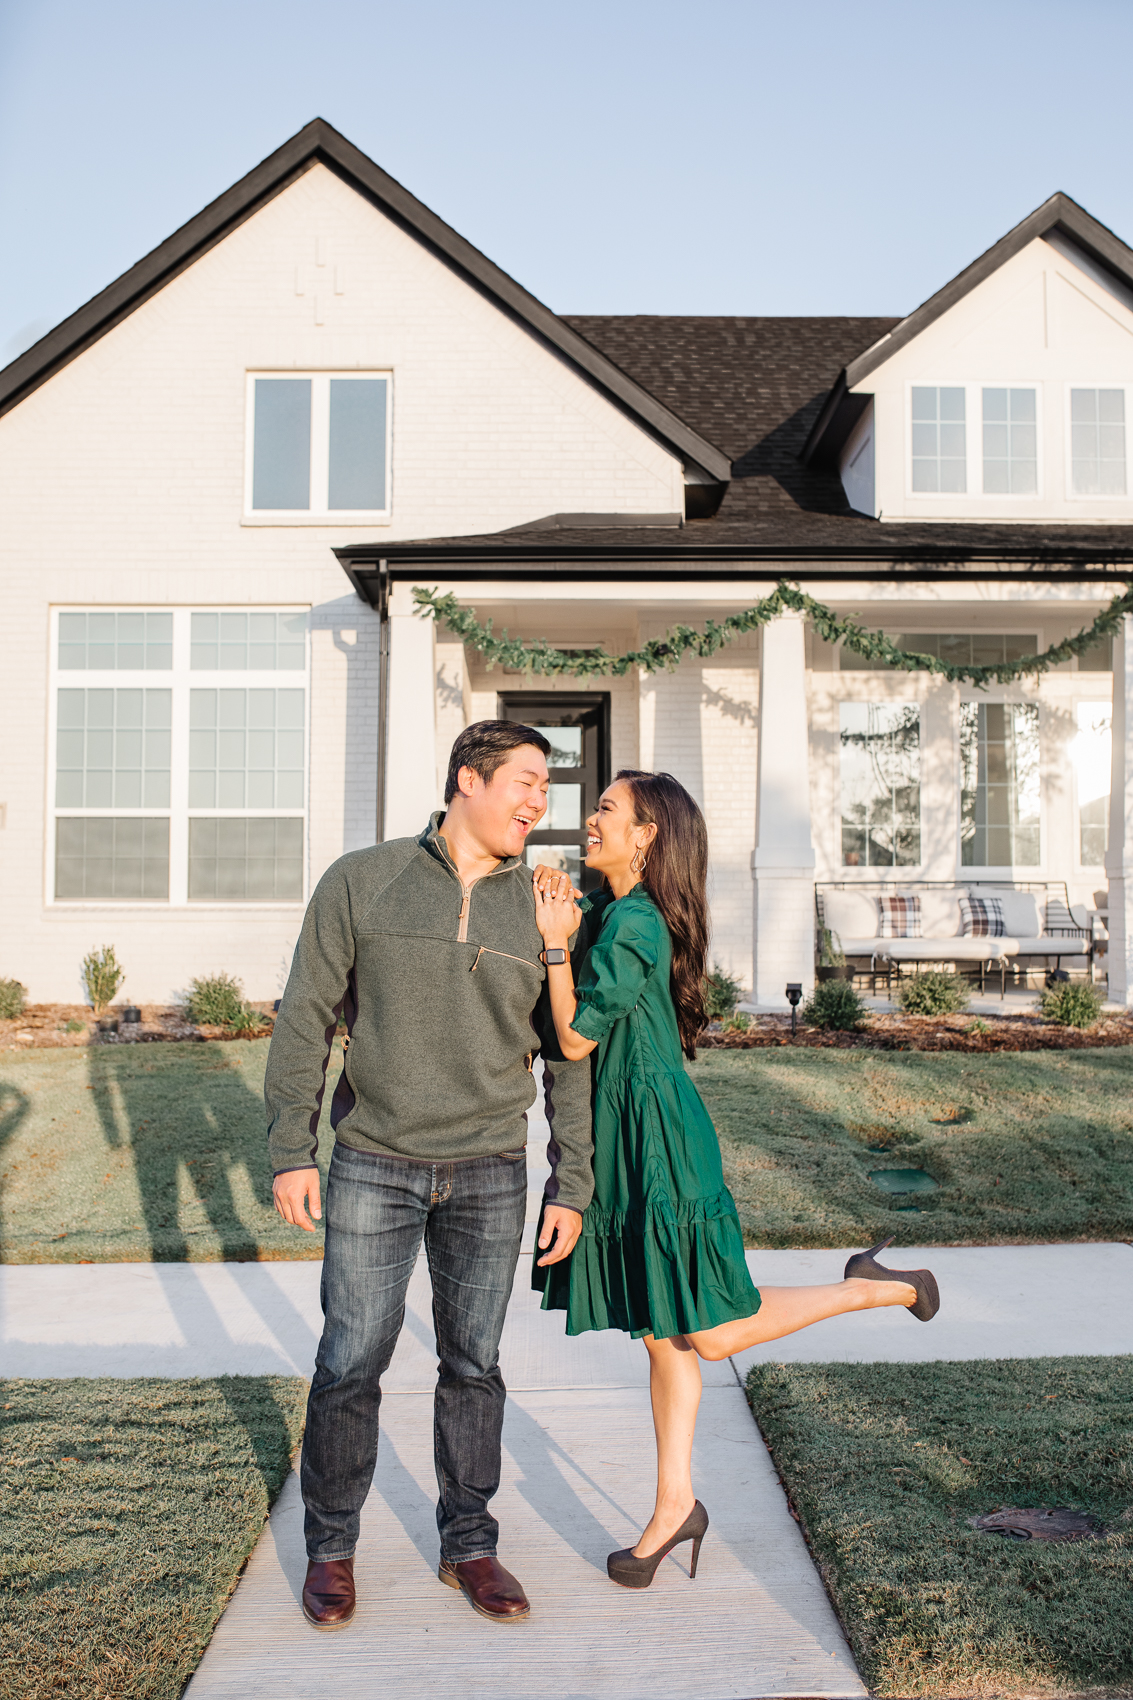 Blogger Hoang-Kim with her fiancé Jonathan in front of their white painted brick house in Dallas wearing a green dress and sweater